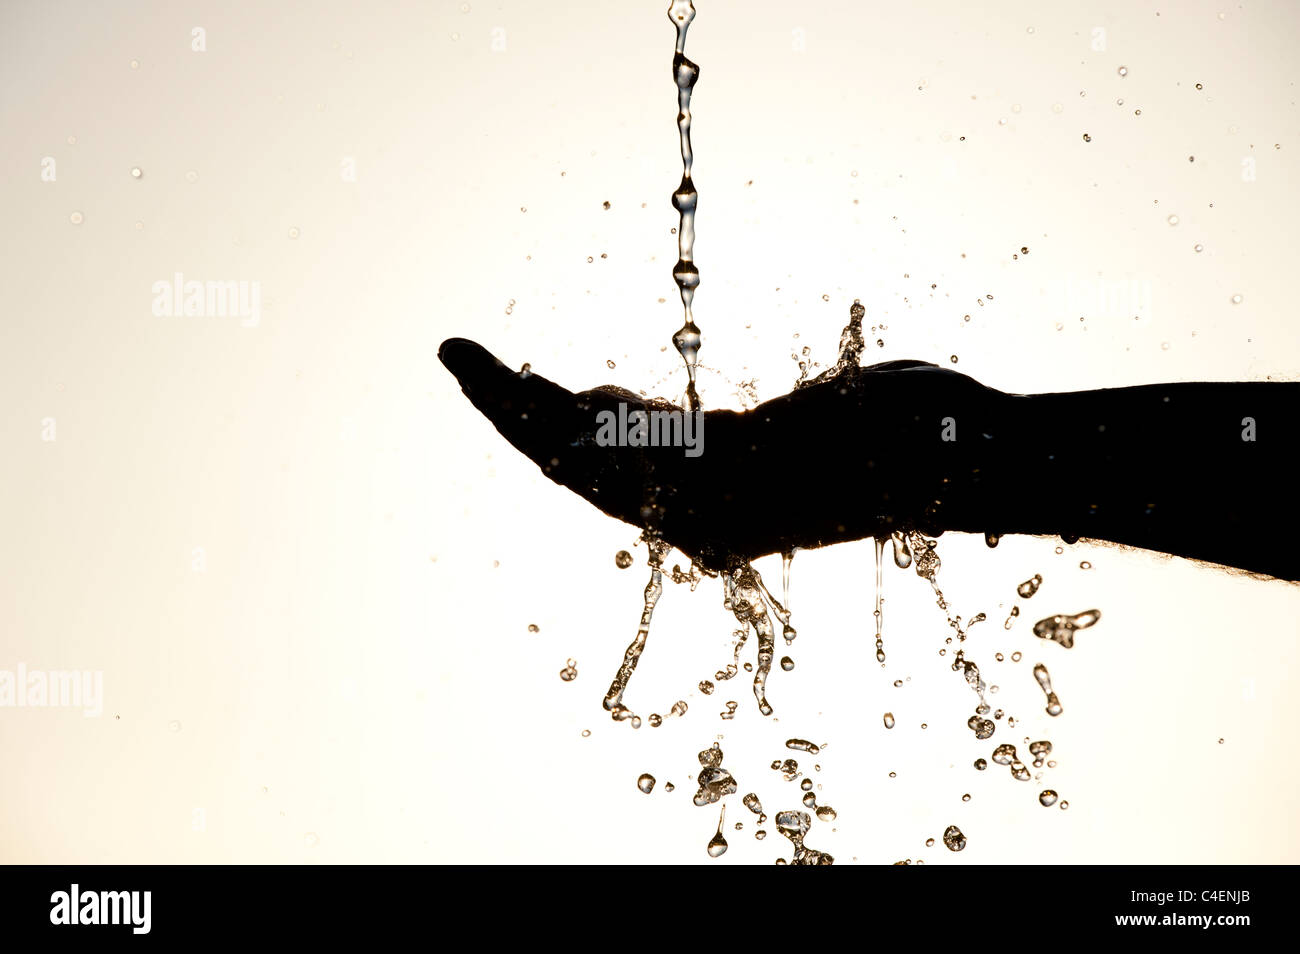 Water pouring and splashing on a hand. Silhouette Stock Photo